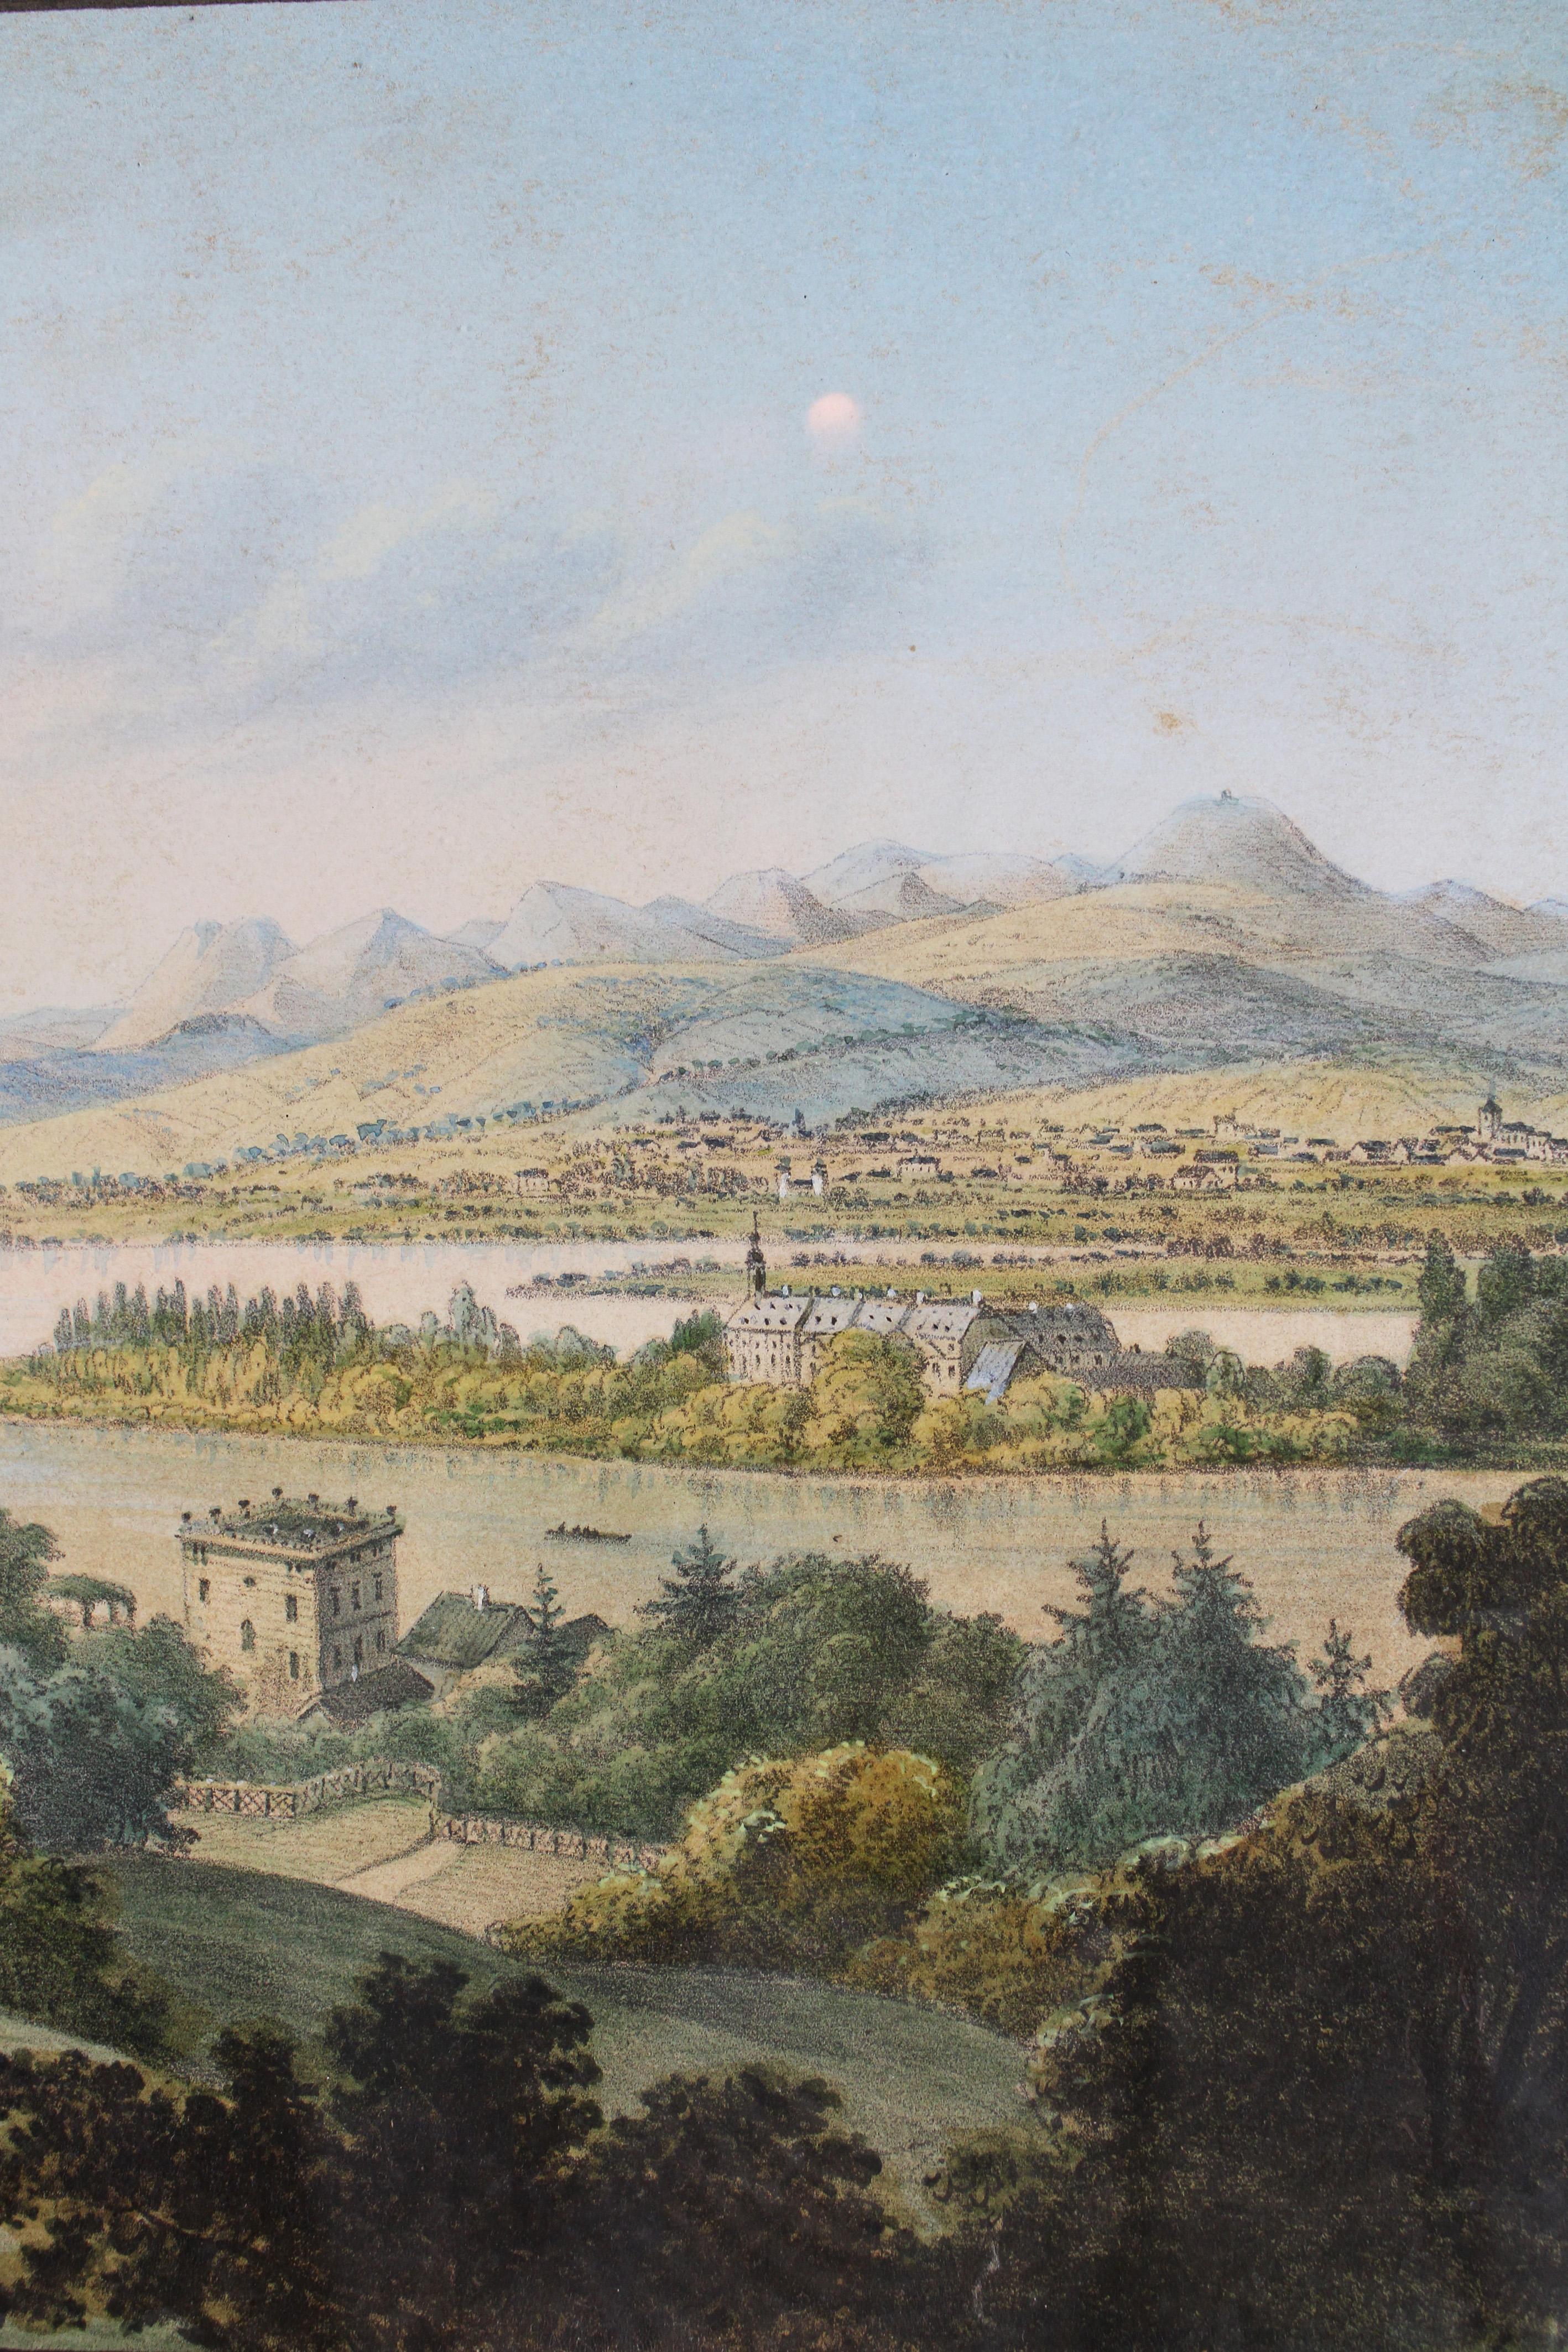 Transport yourself to the picturesque vistas of Italy with our captivating 19th Century Drawing titled 